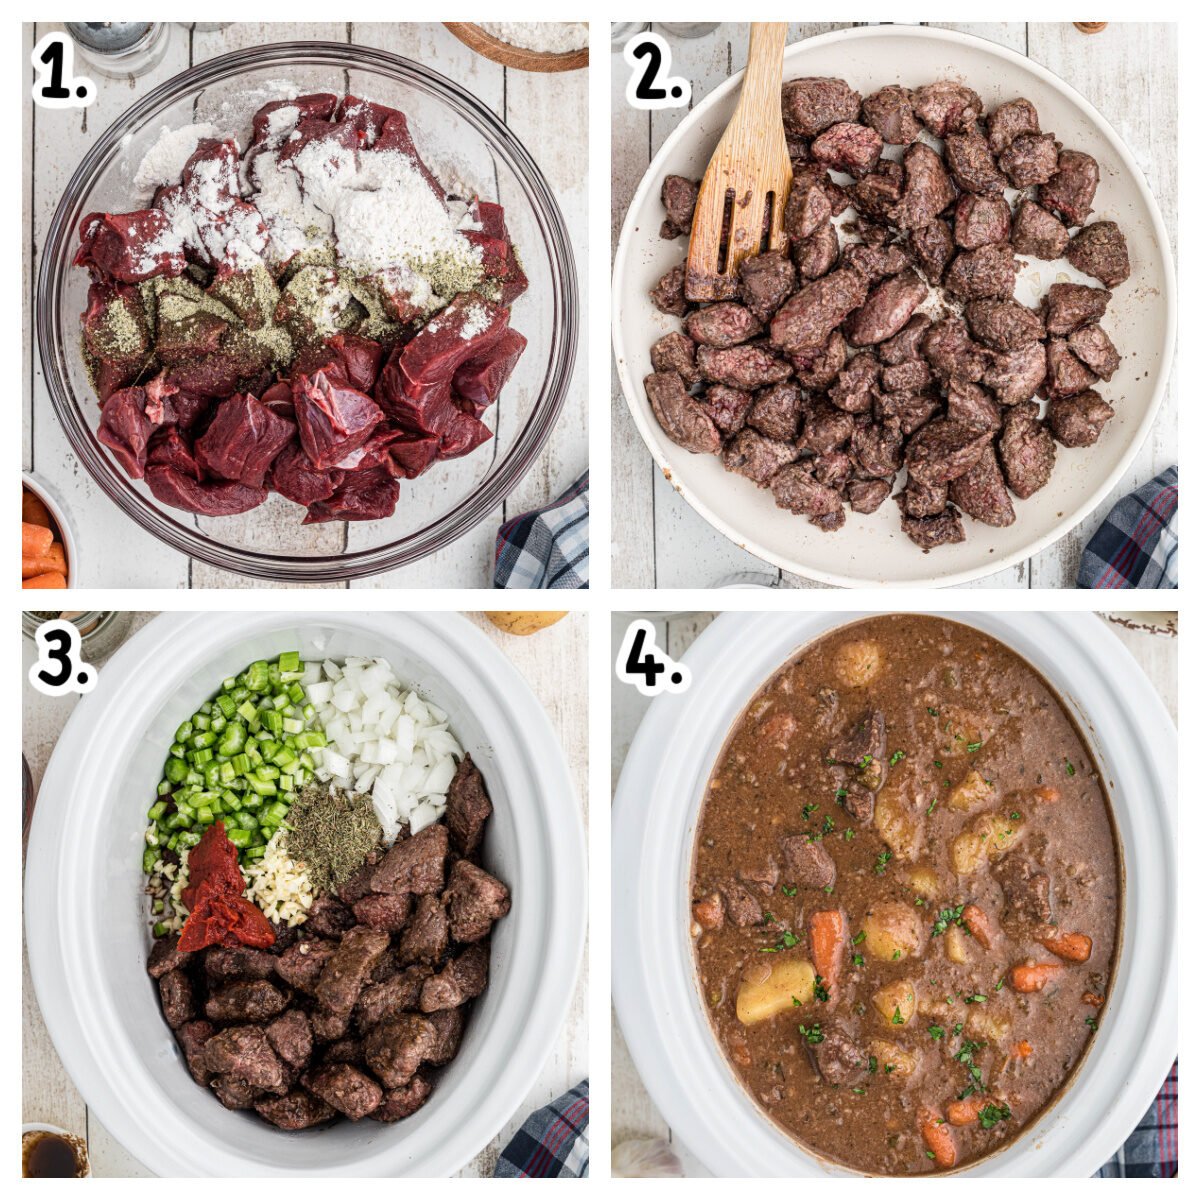 4 images showing how to make venison stew in a slow cooker.